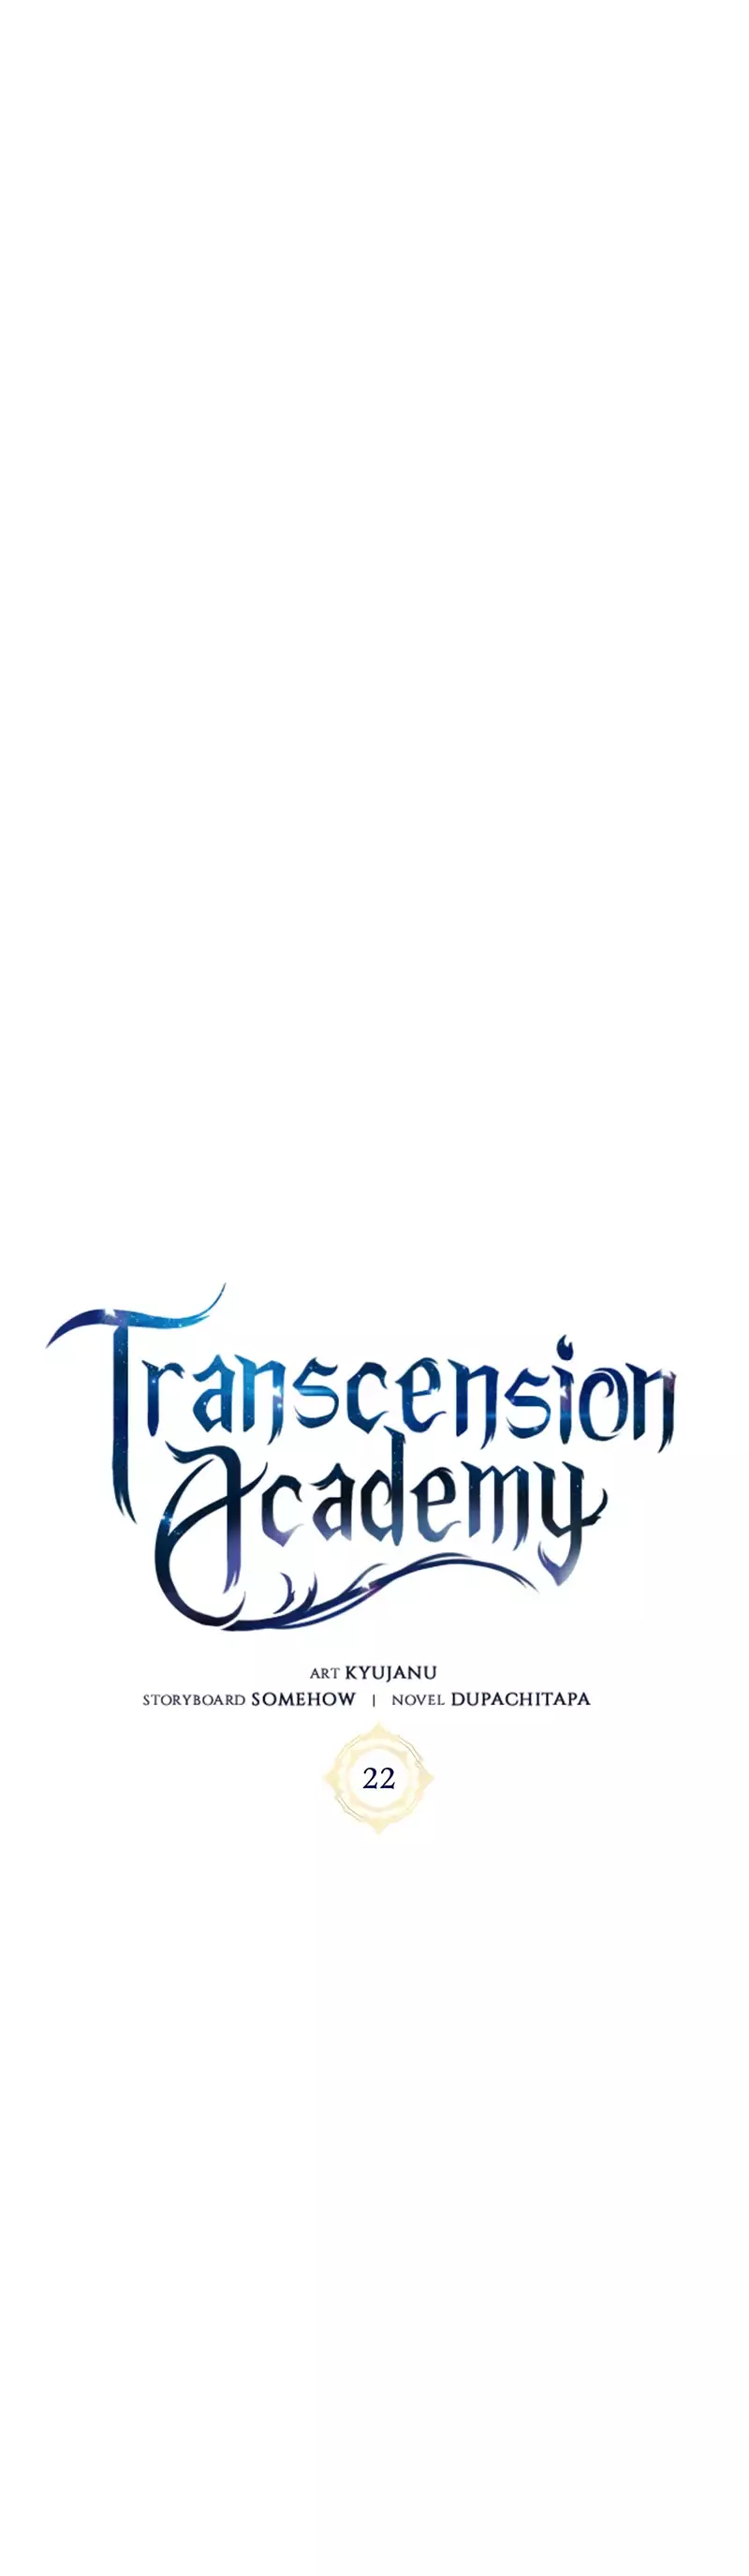 Transcension Academy - 22 page 16-11a7c616